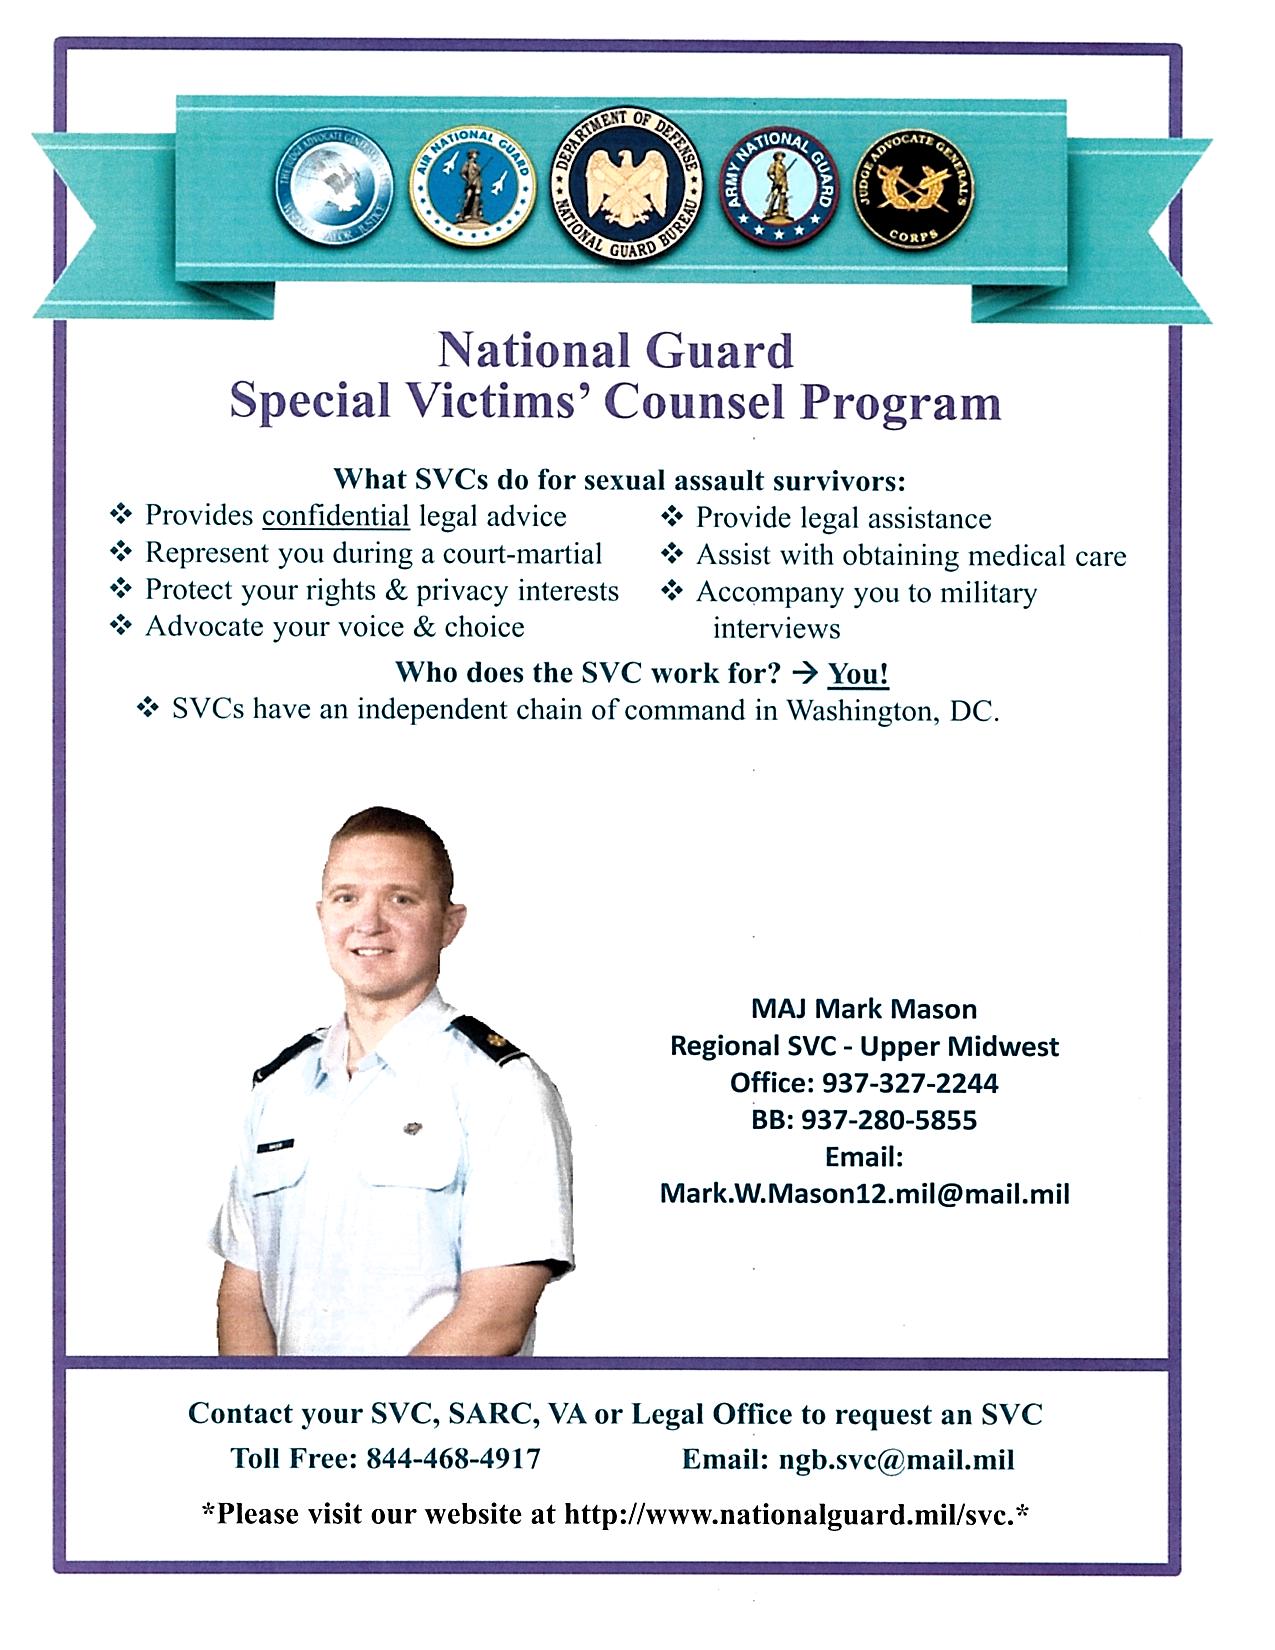 Graphic Image: National Guard Special Victim's Counsel Program. What SVCs do for sexual assault survivors: Provides confidential legal advice. Represent you during a court-martial. Protect your rights and privacy interests. Advocate your voice and choice. Provide legal assistance. Assist with obtaining medical care. Accompany you to military interviews. Who does the SVC work for? You! SVCs have an independent chain of command in Washington, DC. Contact your SVC, SARC, VA or Legal Office to request an SVC; toll free 844-468-4917, email: ngb.svc@mail.mil  Please visit our website at http://www.nationalguard.mil/svc.